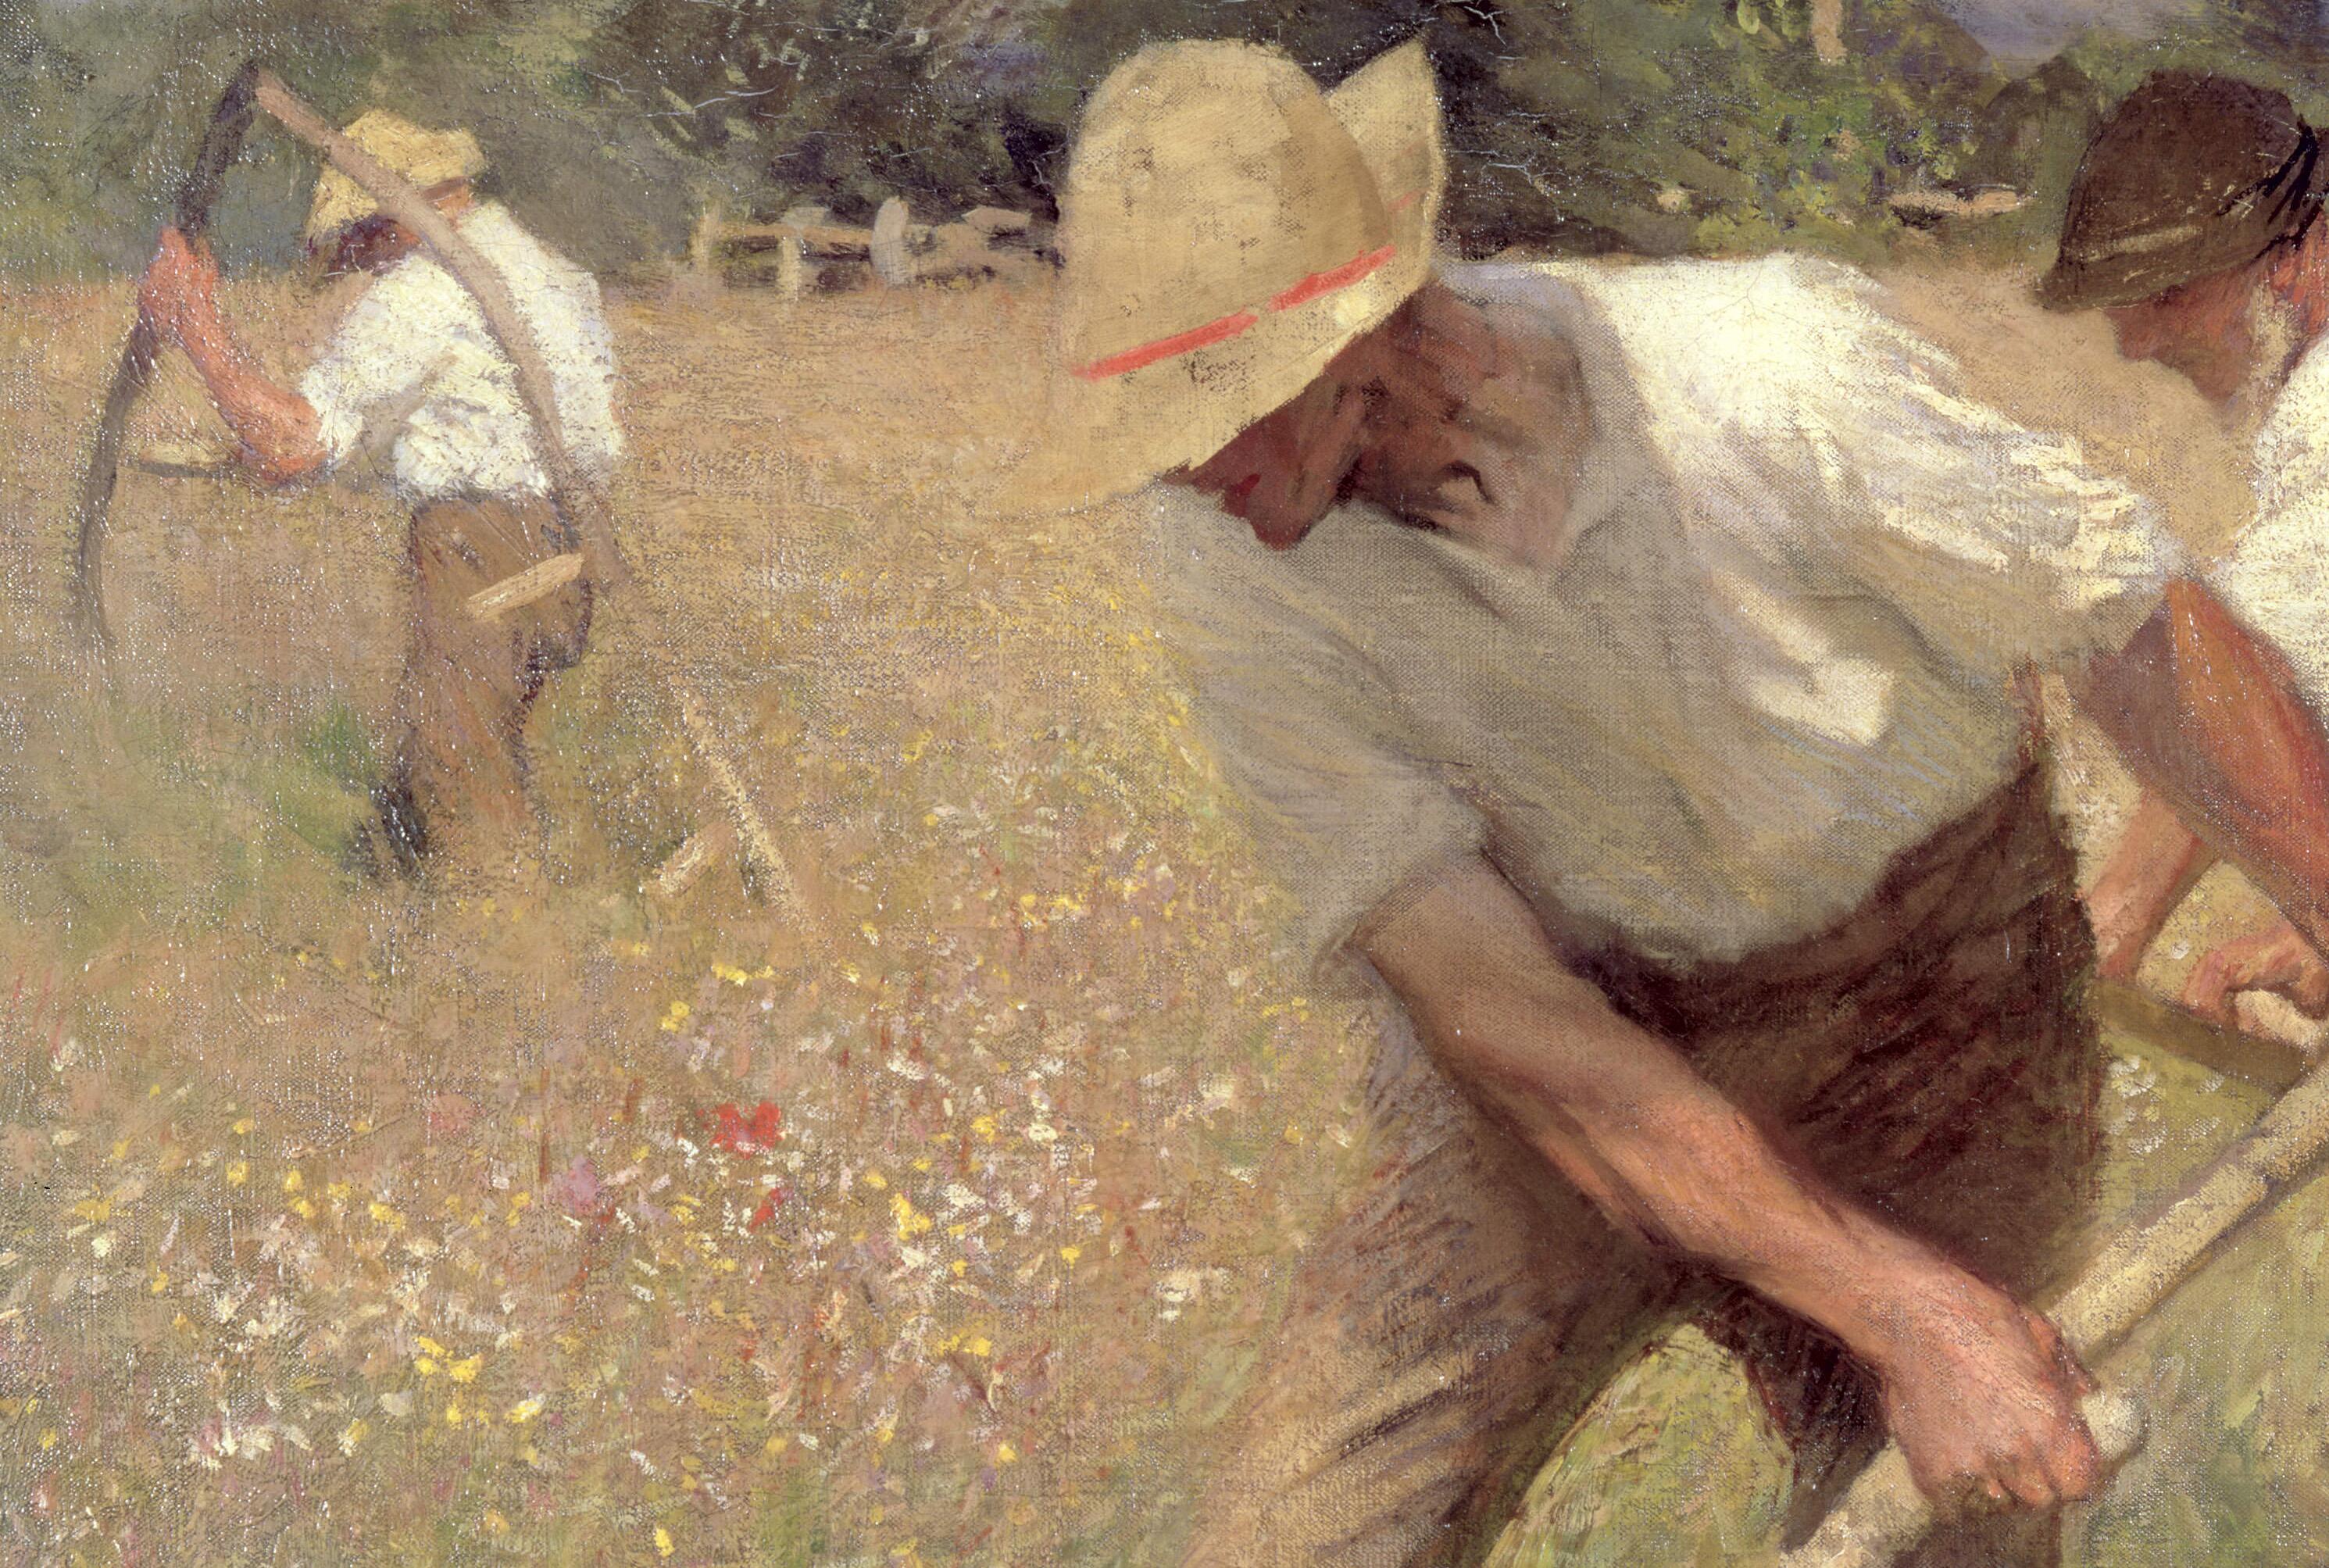 George Clausen, <i>The Mowers</i>, 1891, oil on canvas, 97.2 x 76.2 cm. Collection of Lincolnshire County Council, Usher Gallery, Lincoln (LCNUG 1927.1893). Digital image courtesy of Bridgeman Images (All rights reserved).